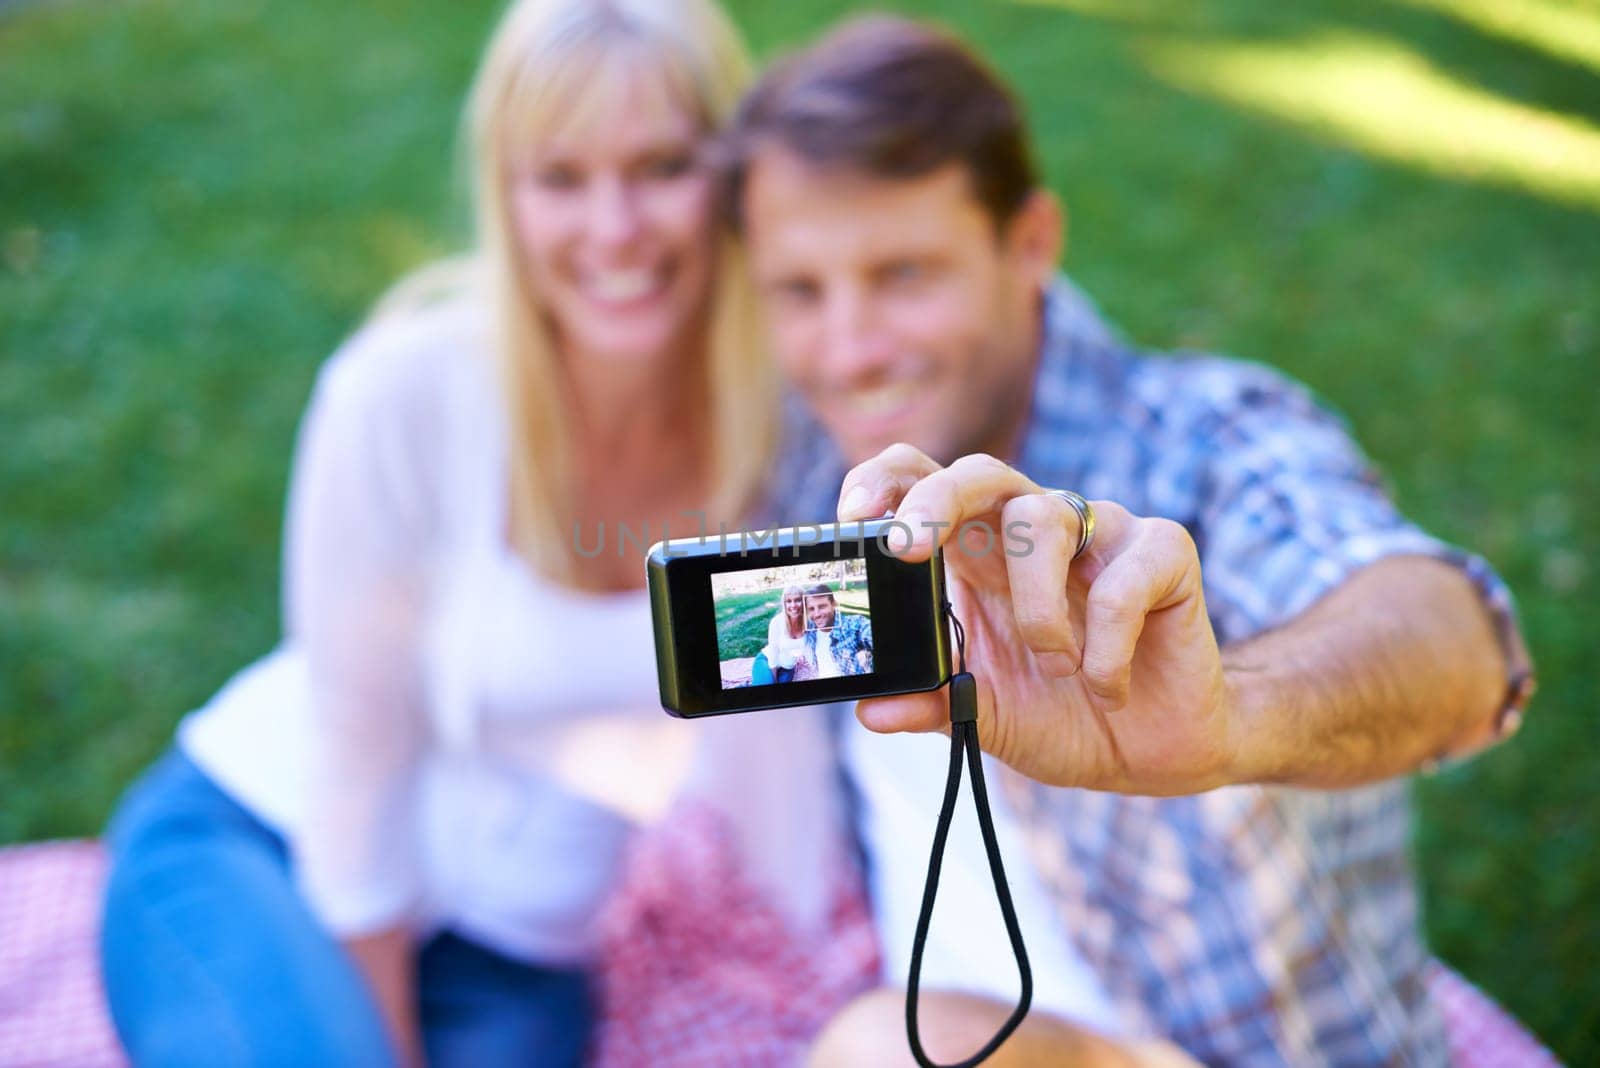 Camera, screen and couple in a park, date and happiness with love and romance with a selfie in nature. Photograph, outdoor and memory with man and woman with marriage and relationship with sunshine.